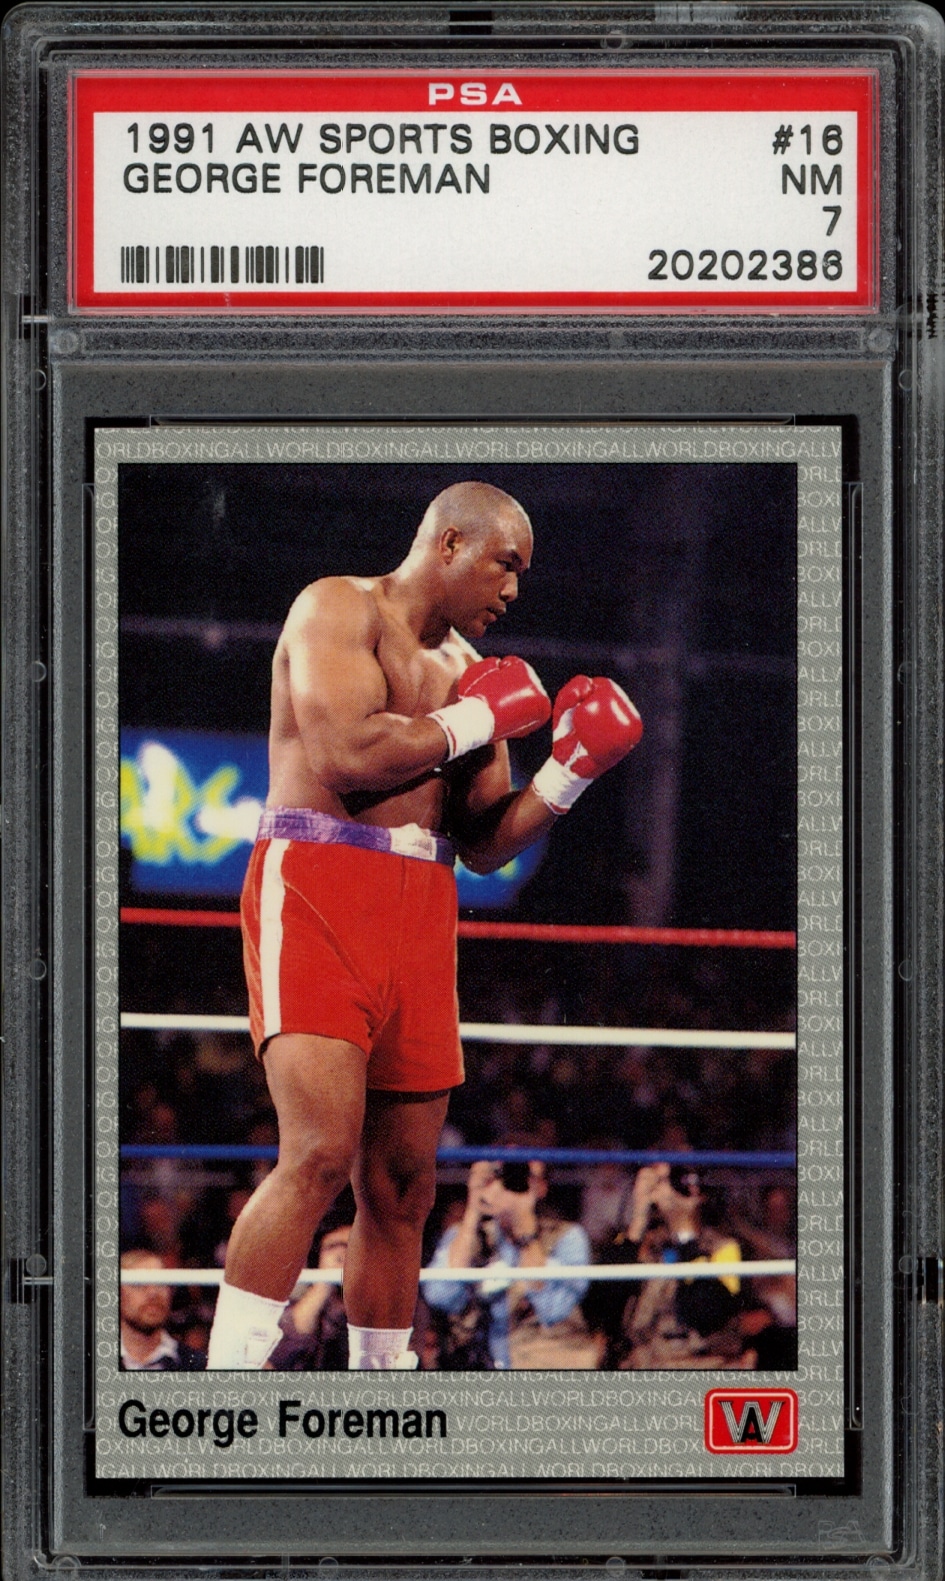 George Foreman on 1991 AW Sports Boxing card #16, rated PSA 7 in Near Mint condition.